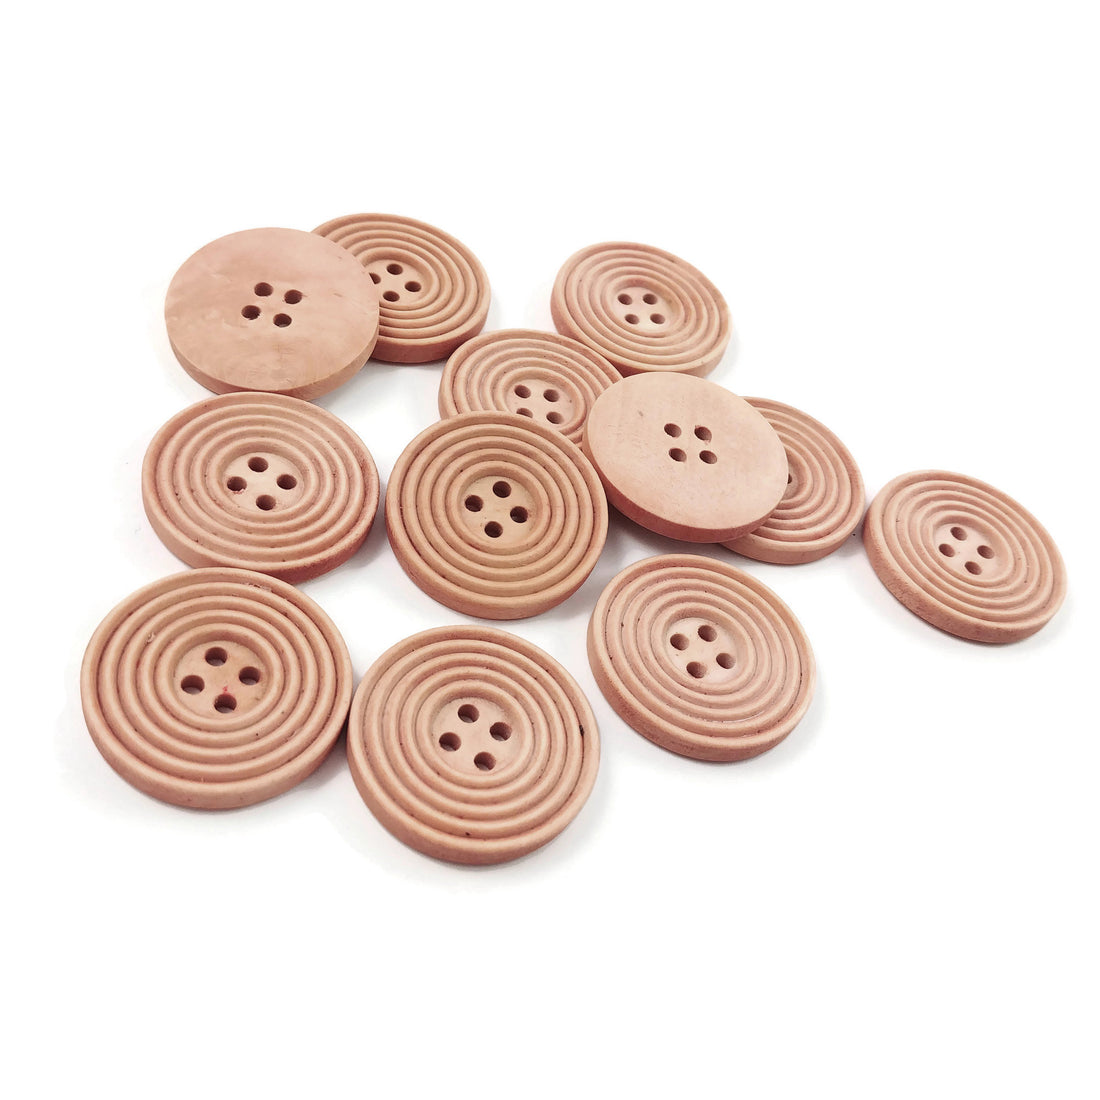 Wooden sewing buttons 30mm - set of 6 rose circle wood button